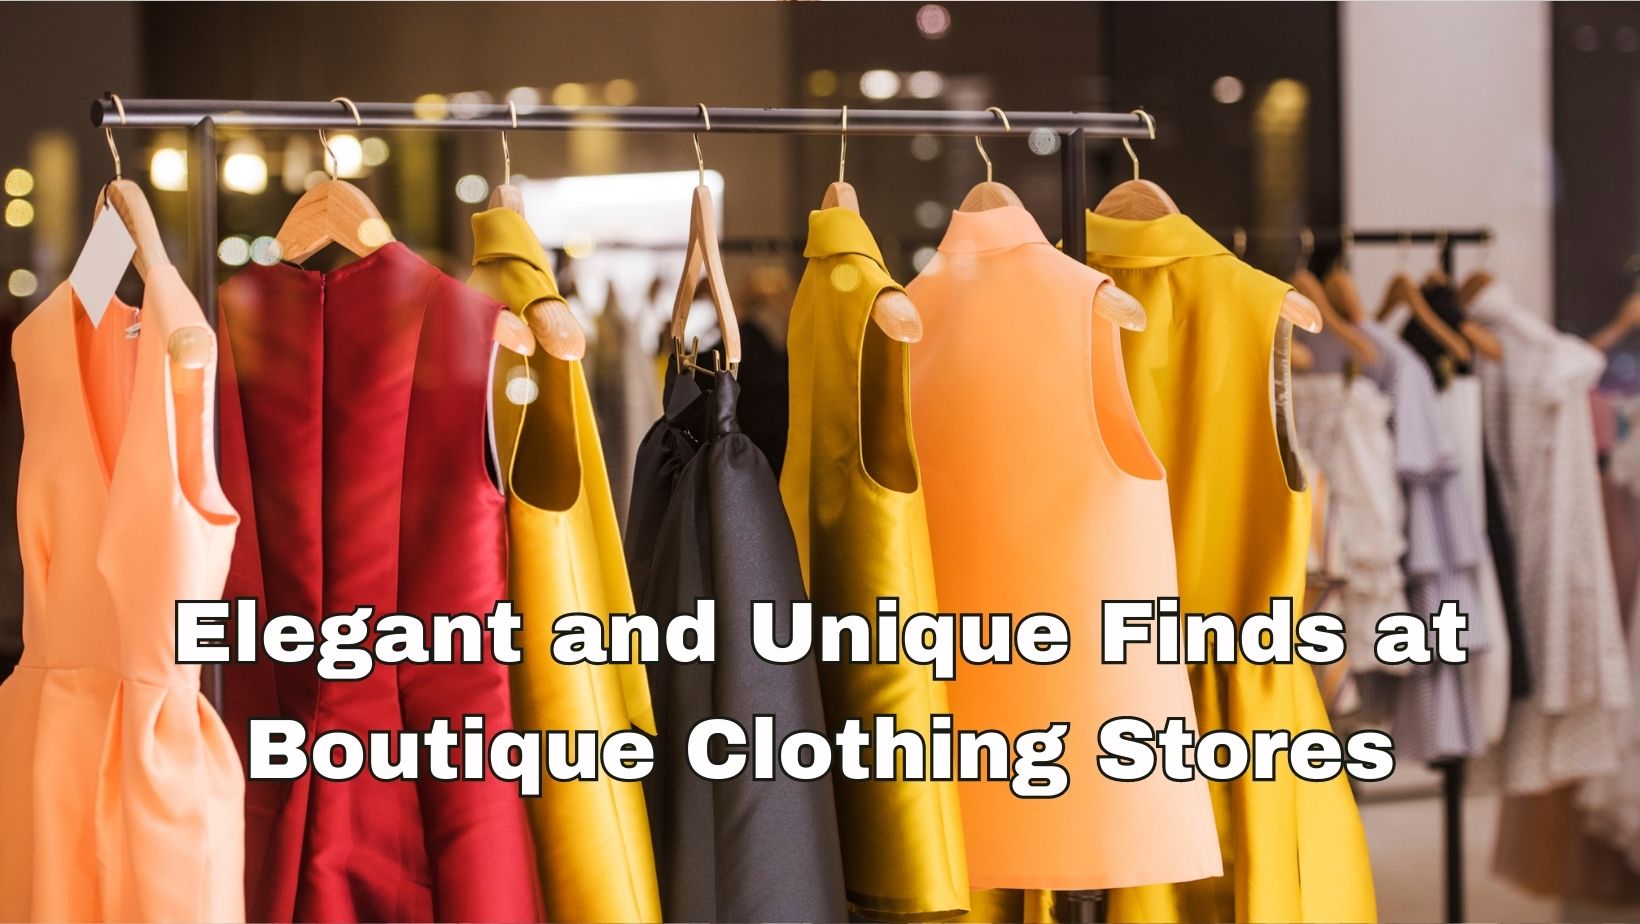 Elegant and Unique Finds at Boutique Clothing Stores